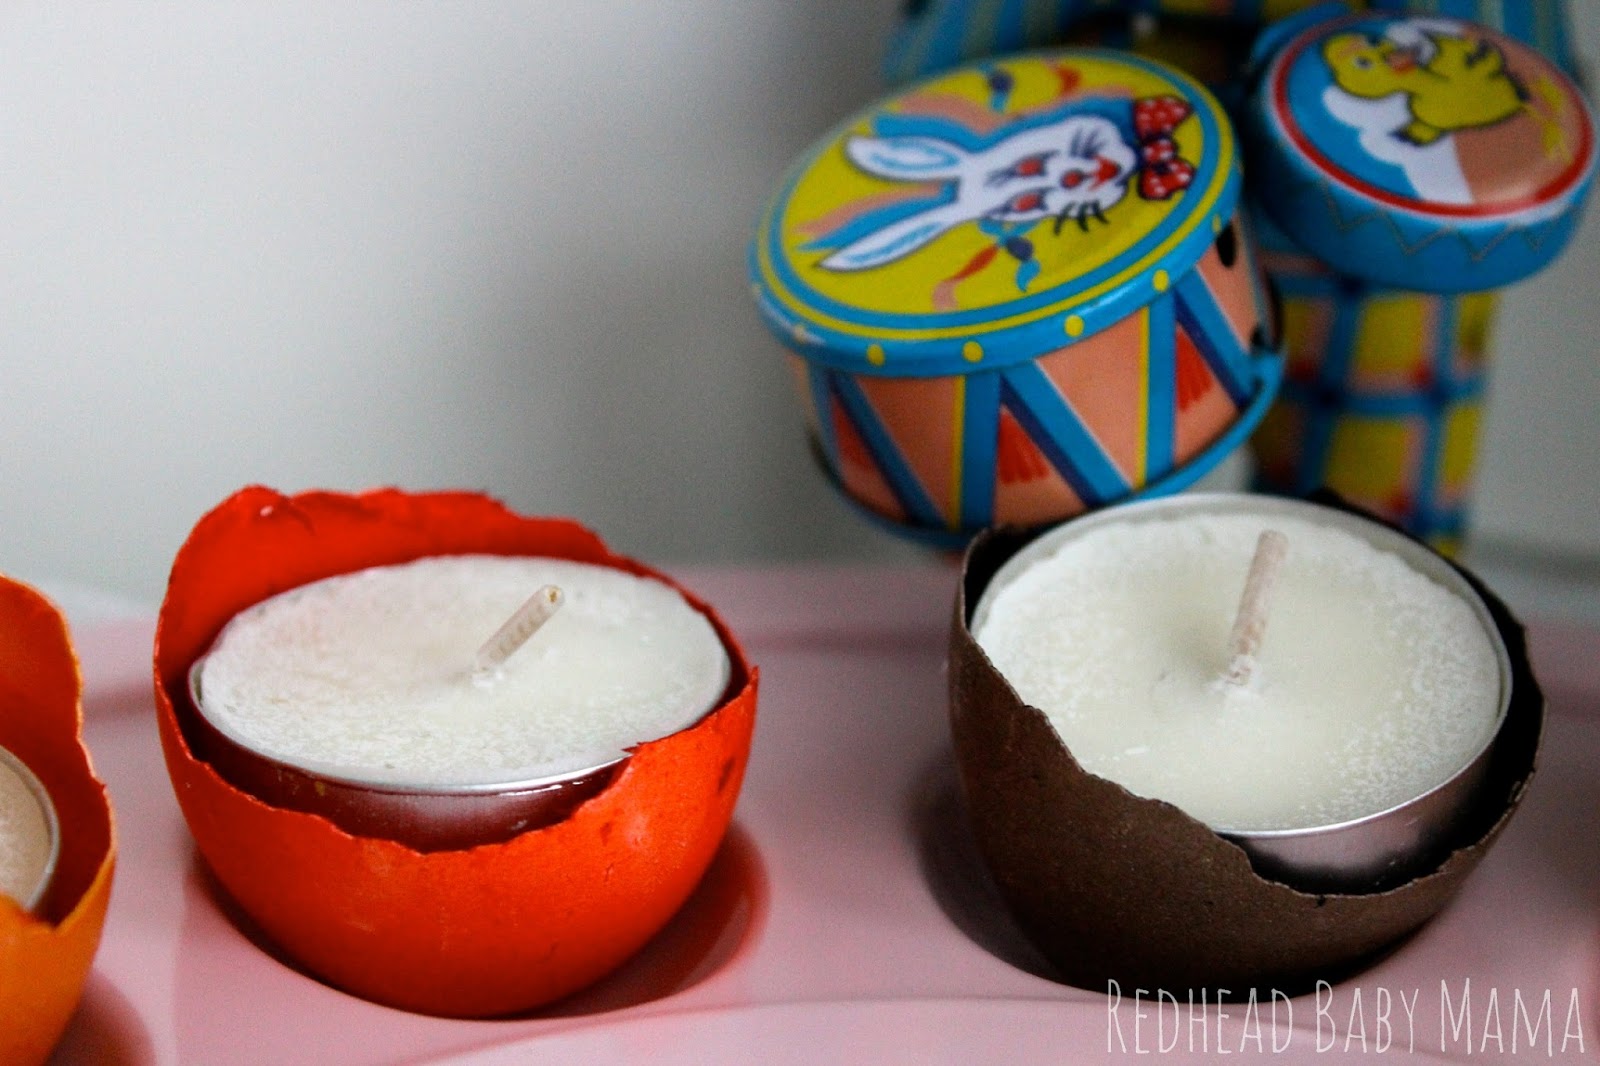 Easter Eggshell Tealights  by Redhead Baby Mama